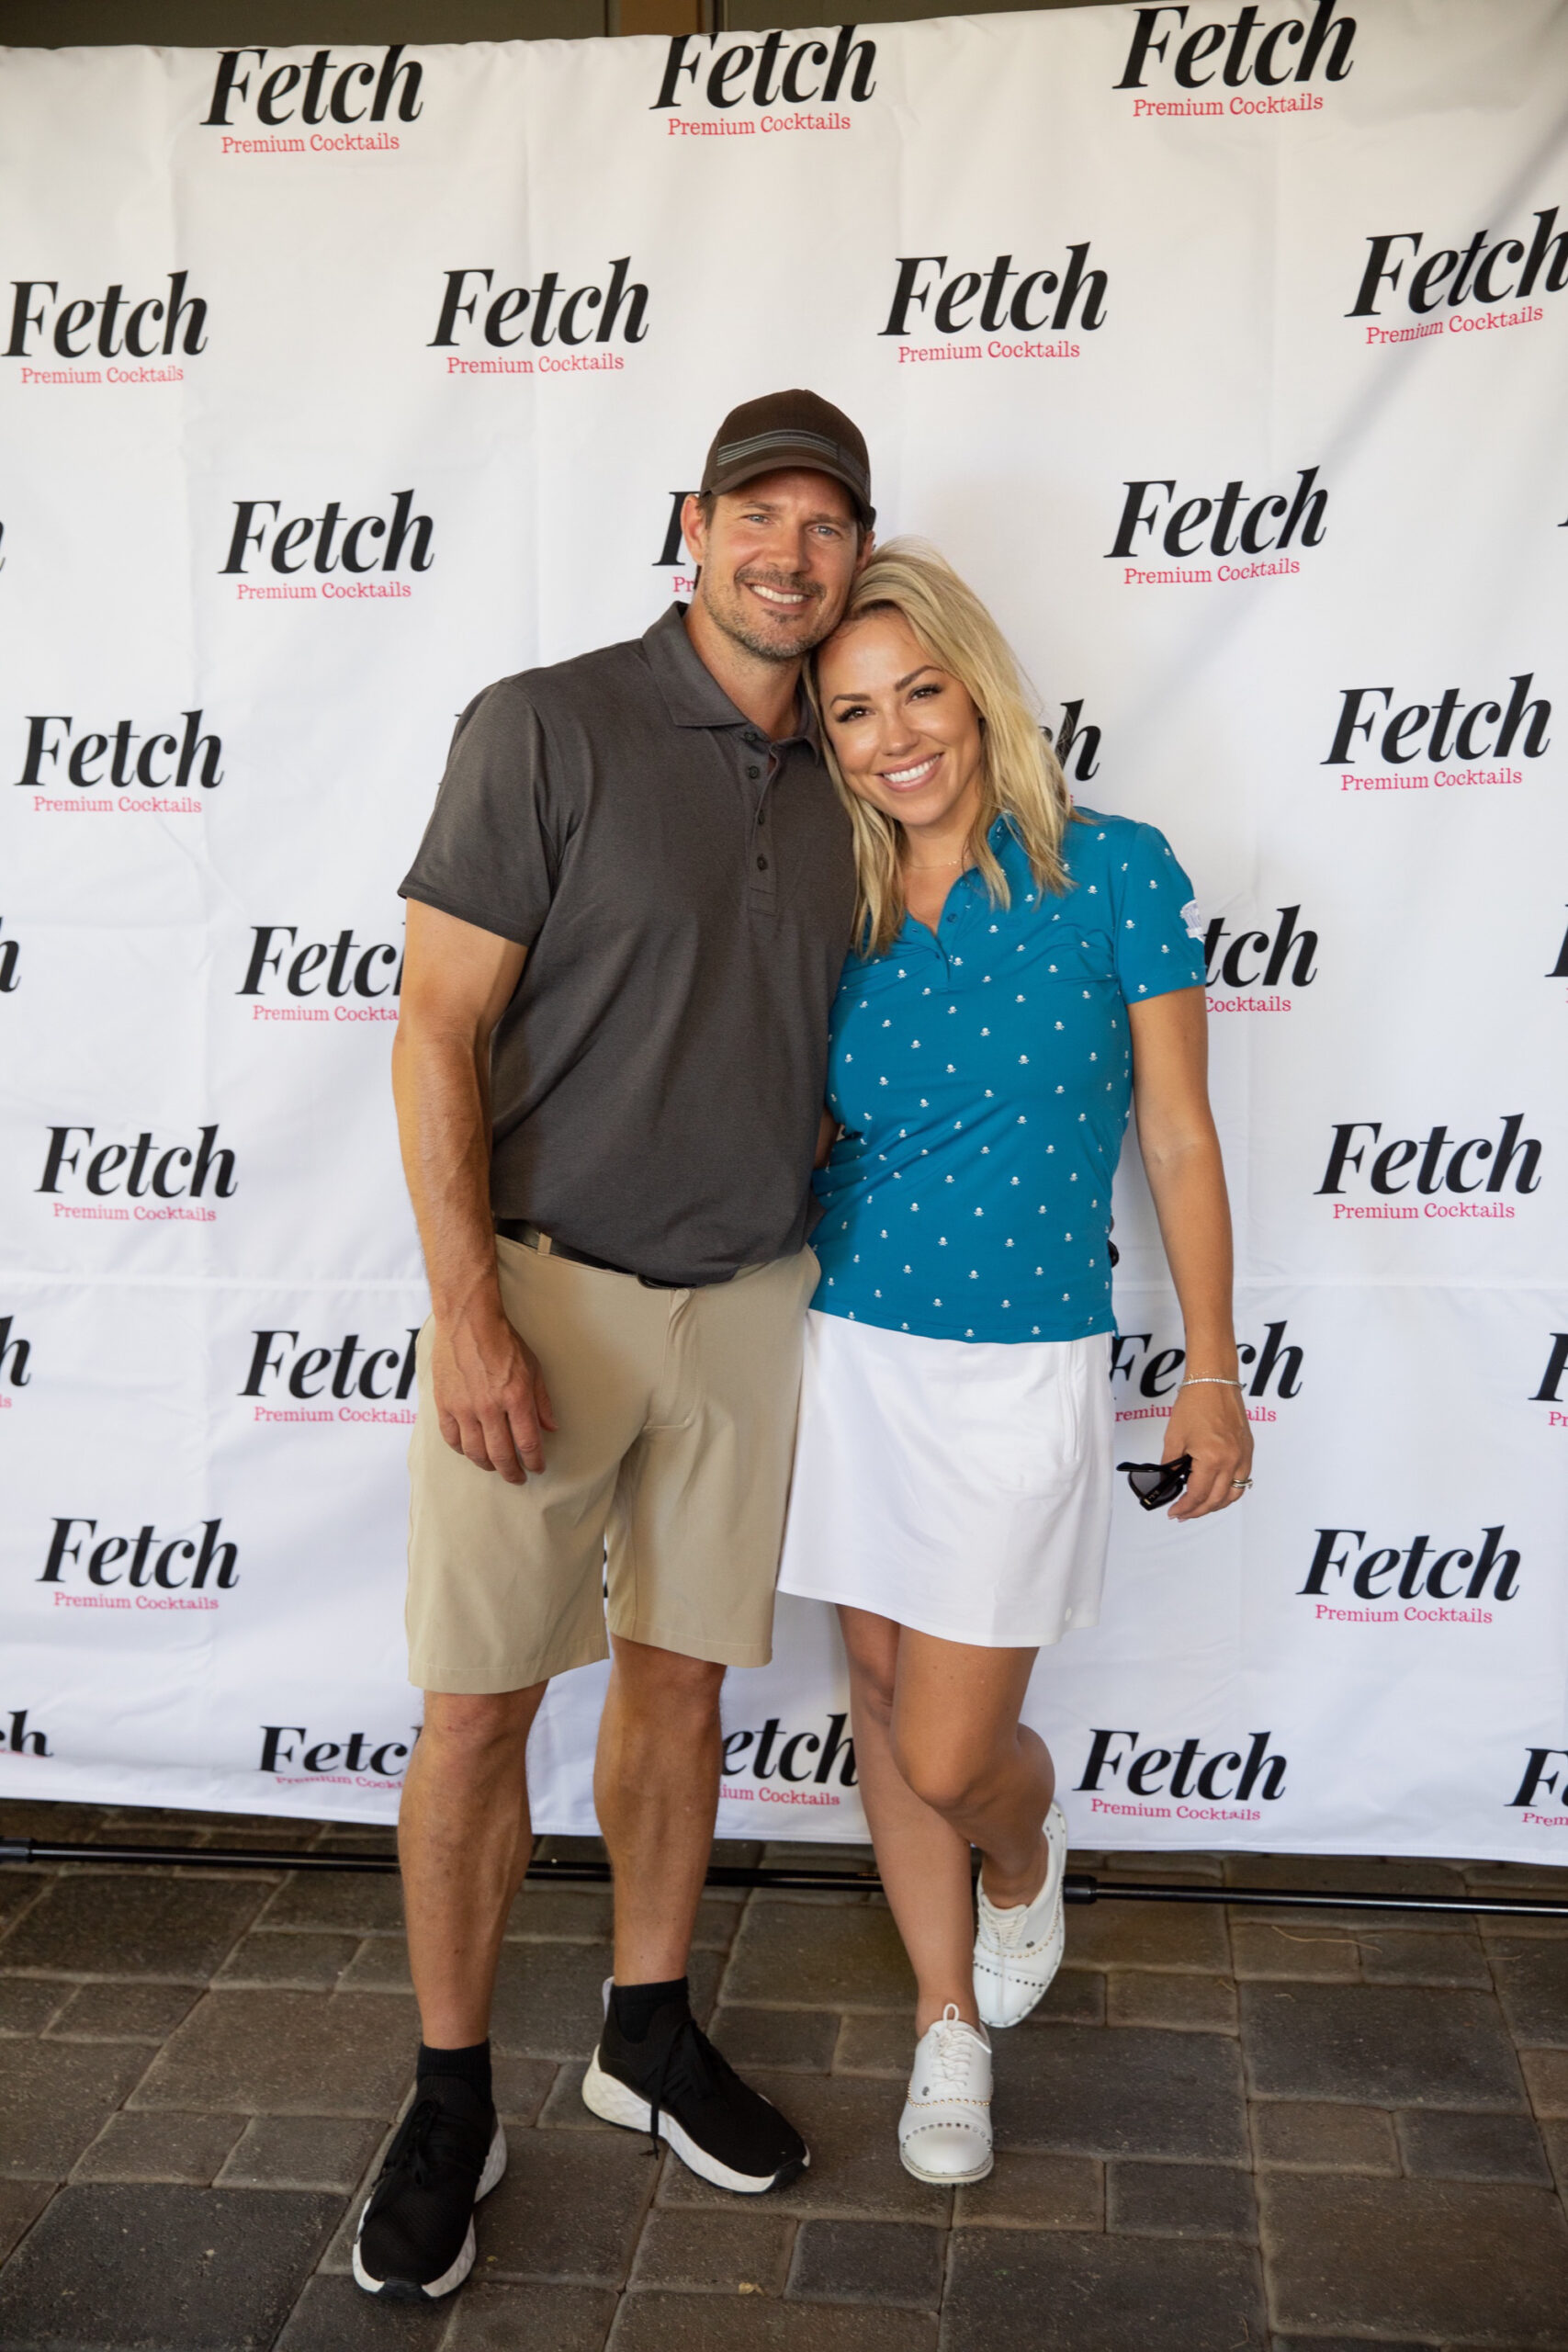 Jessica Hall and husband, Kyle, wearing golf clothes and standing in front of a step and repeat with Fetch Cocktail logos.